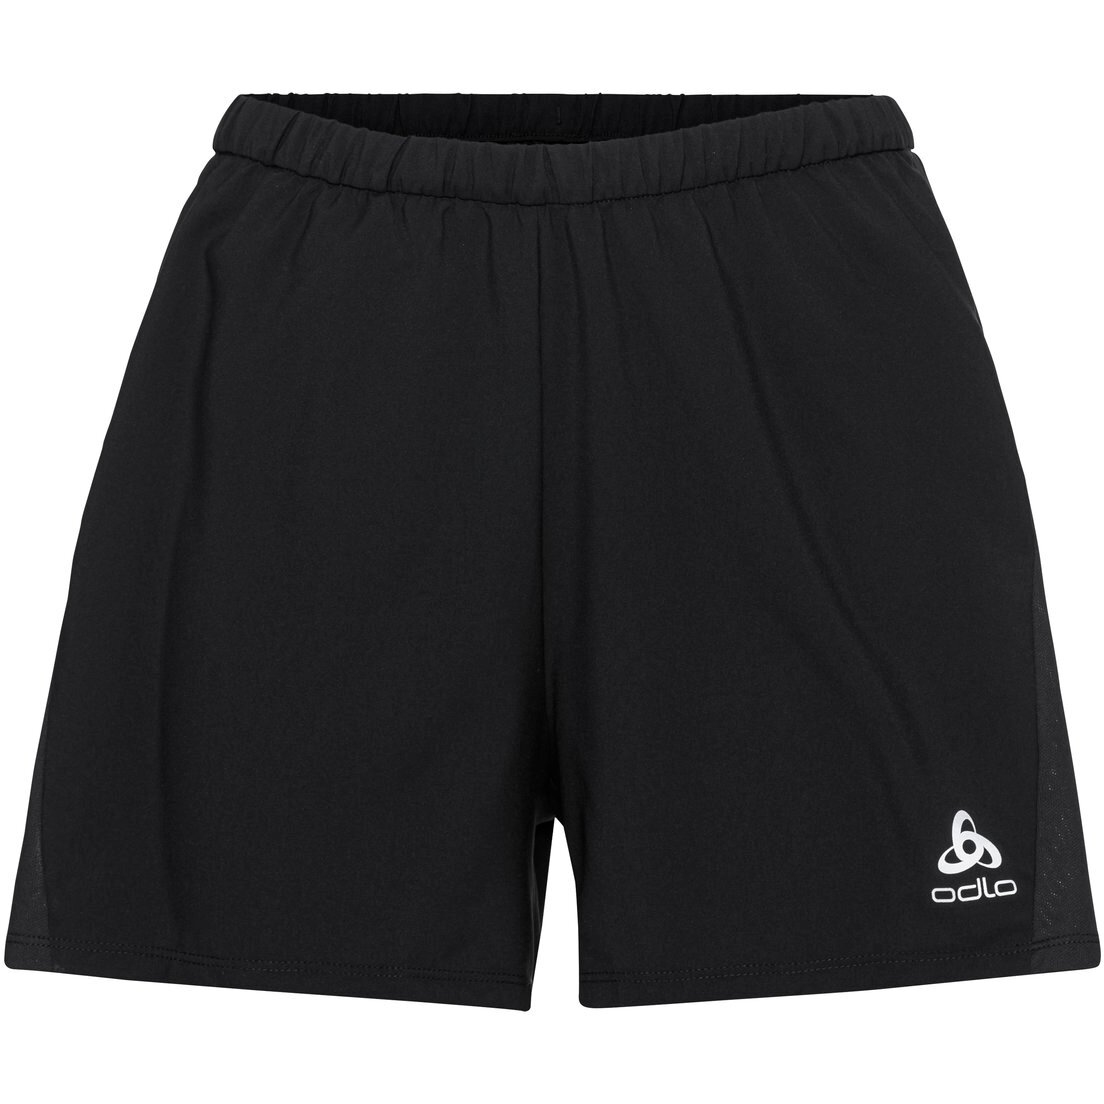 Picture of Odlo Essentials 4 Inch Running Shorts Women - black